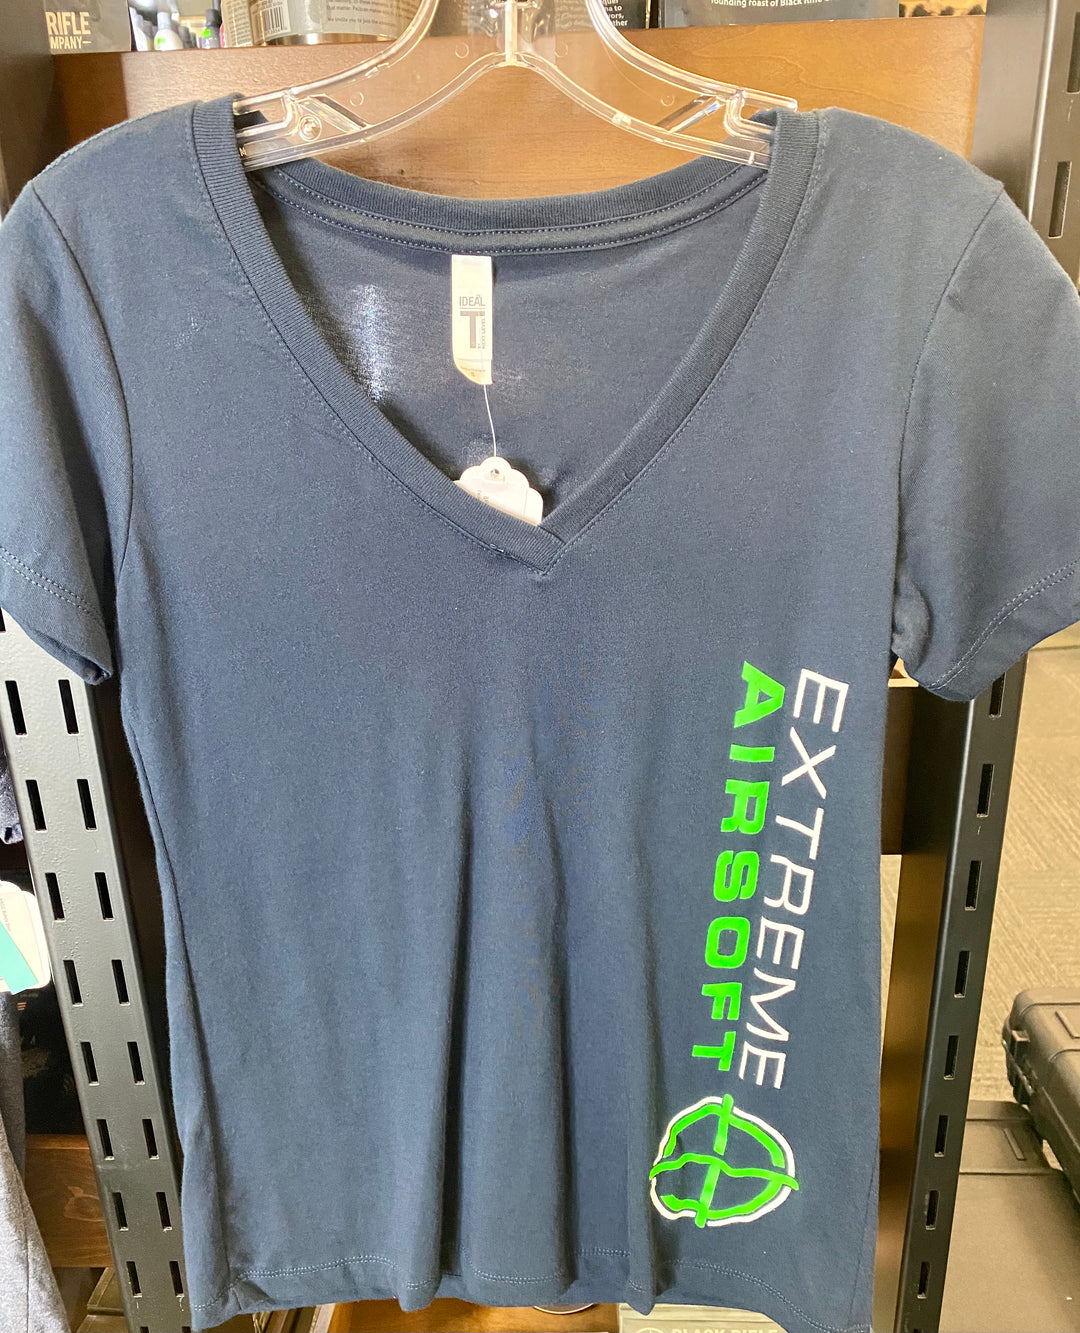 Extreme Airsoft T-Shirt (Women’s V-Neck)